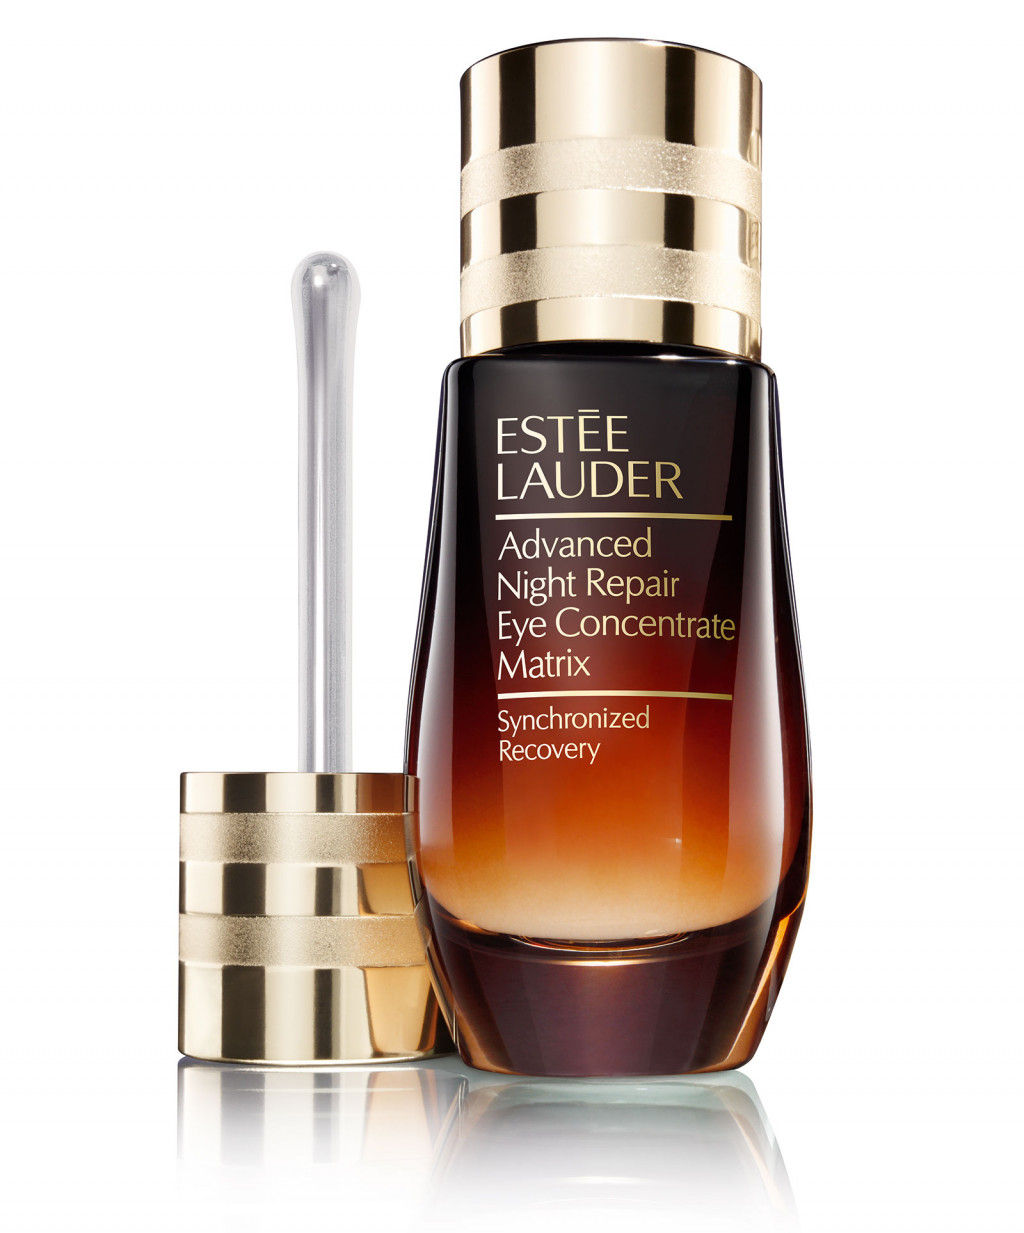 Estée Lauder Advanced Night Repair Eye Concentrate Matrix Synchronized Recovery | Skin Care